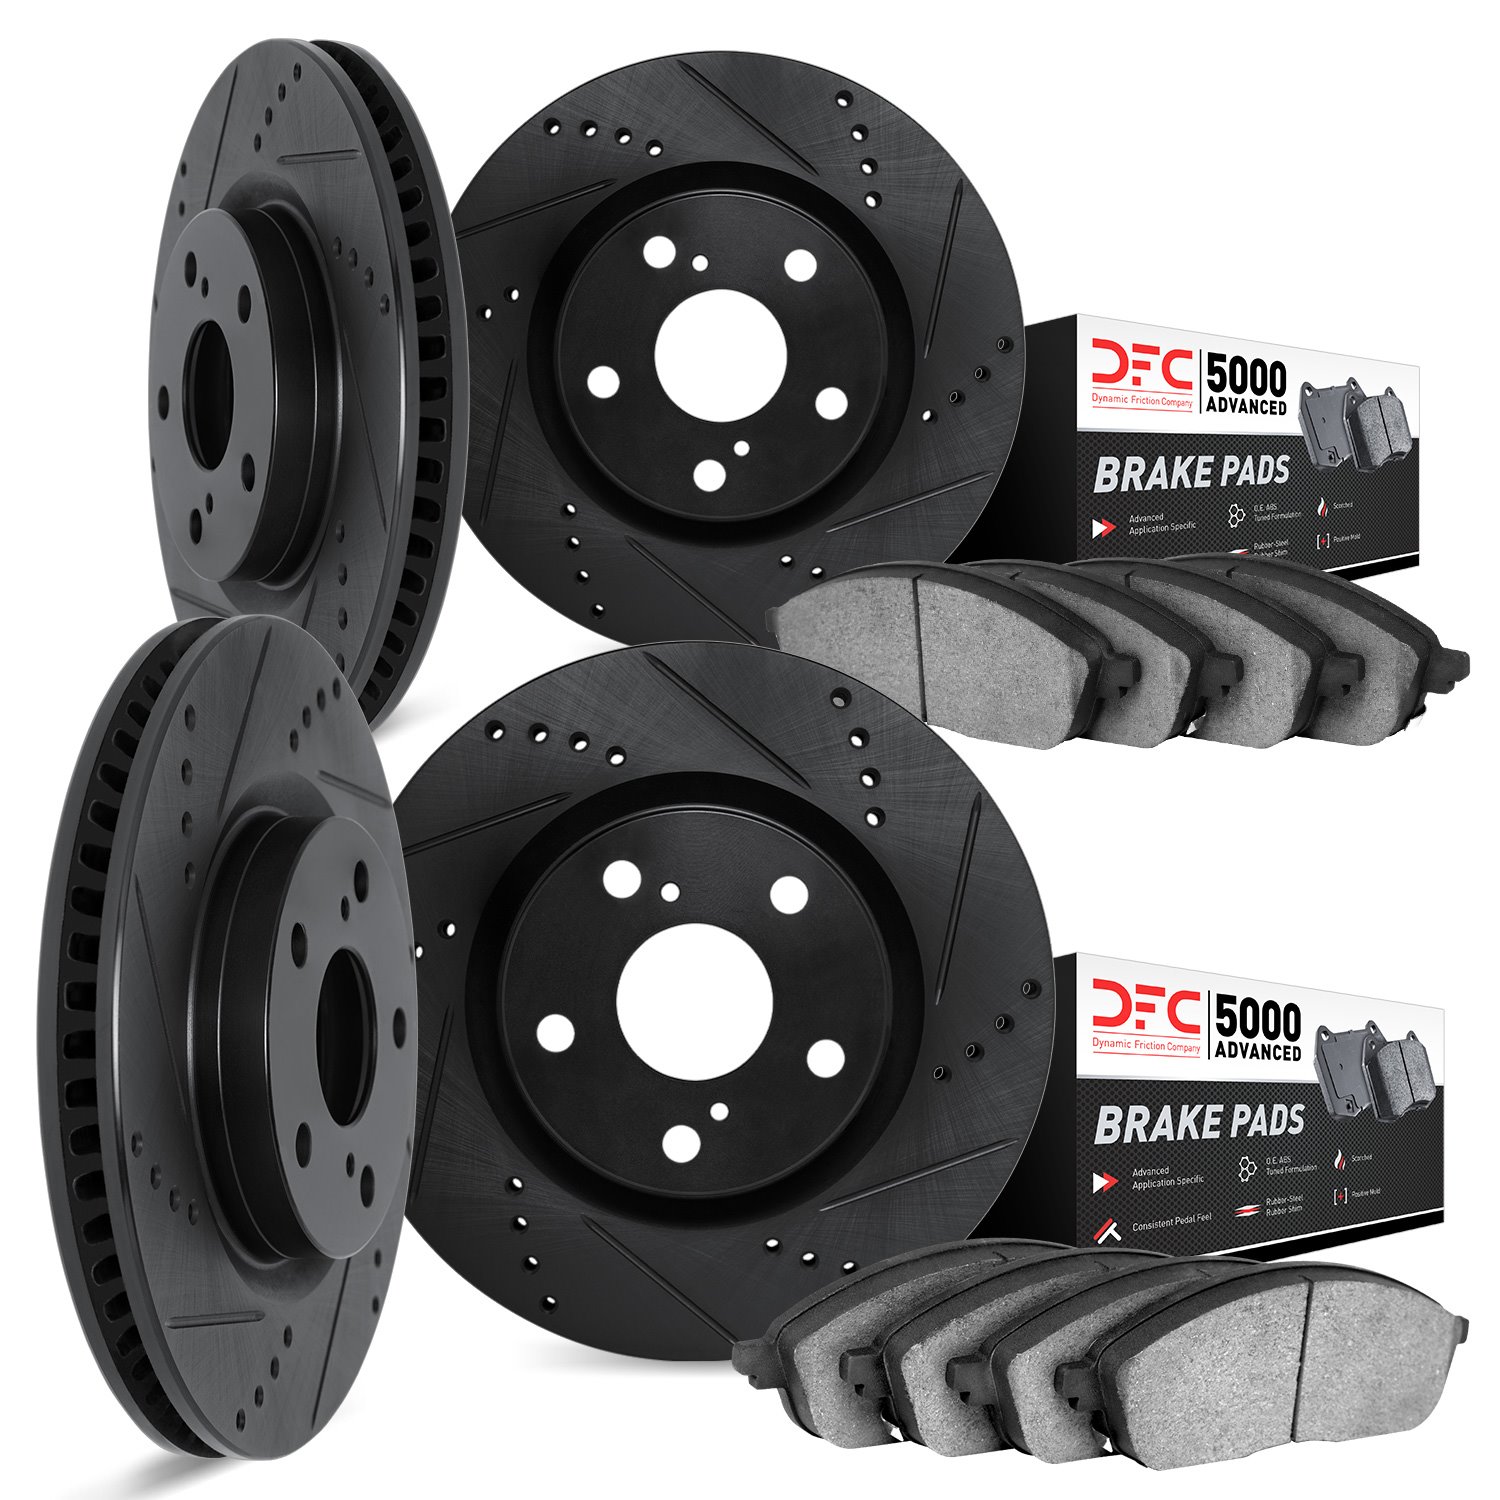 8504-02002 Drilled/Slotted Brake Rotors w/5000 Advanced Brake Pads Kit [Black], 1969-1977 Porsche, Position: Front and Rear